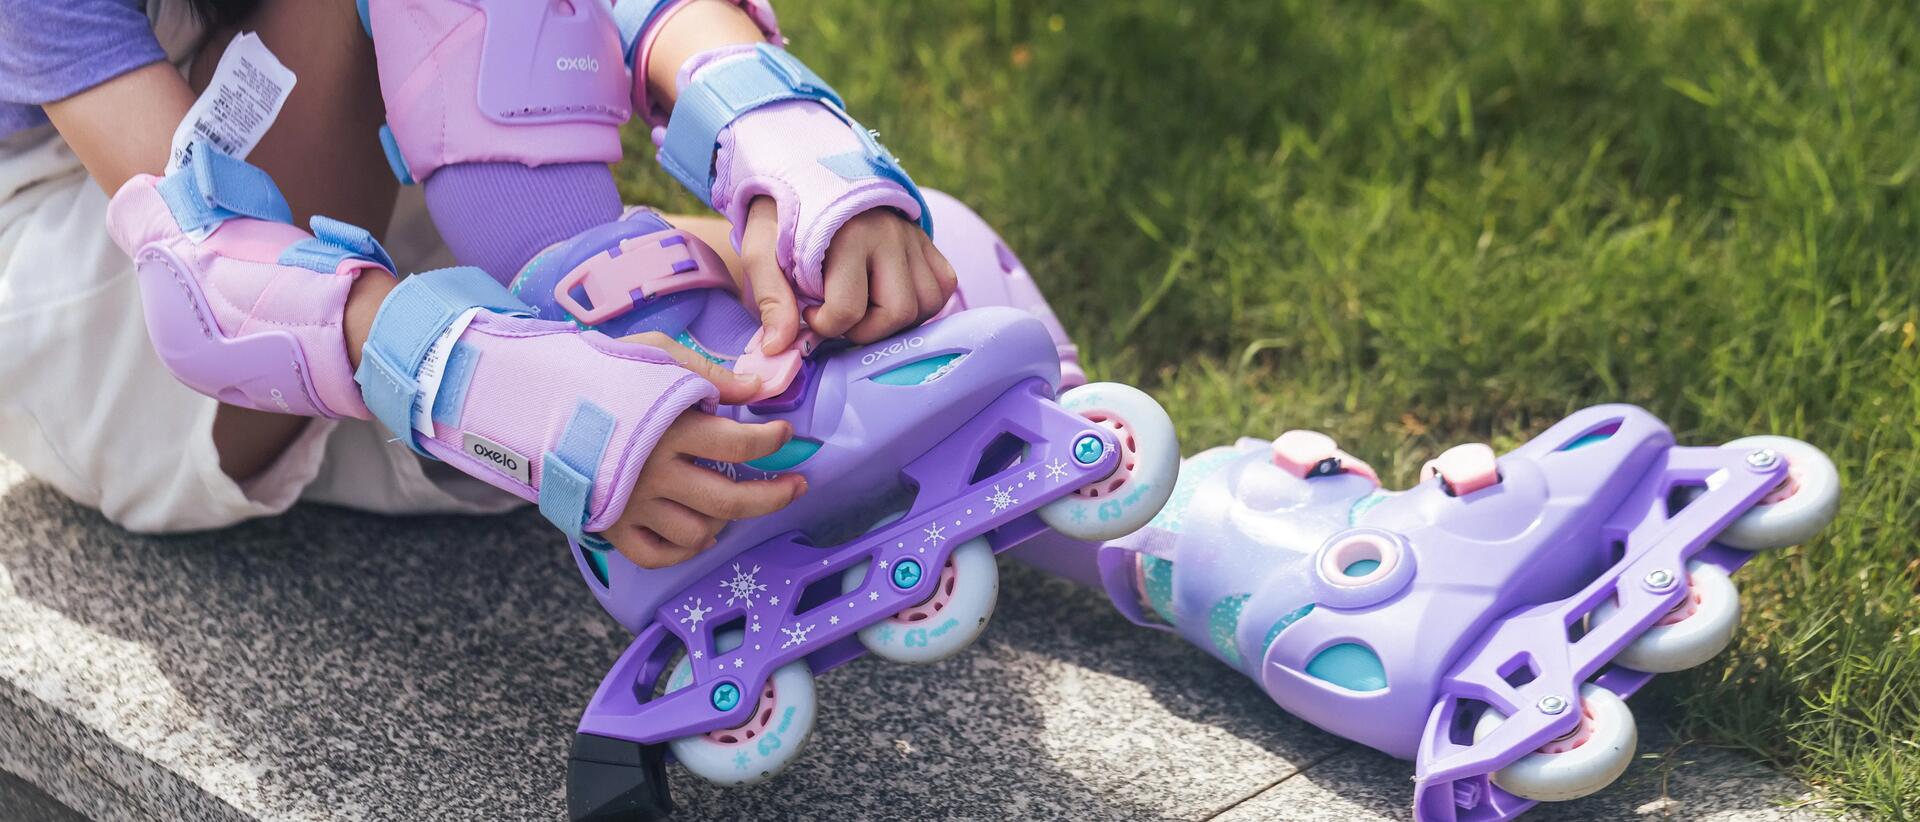 Child putting on roller skates on the ground